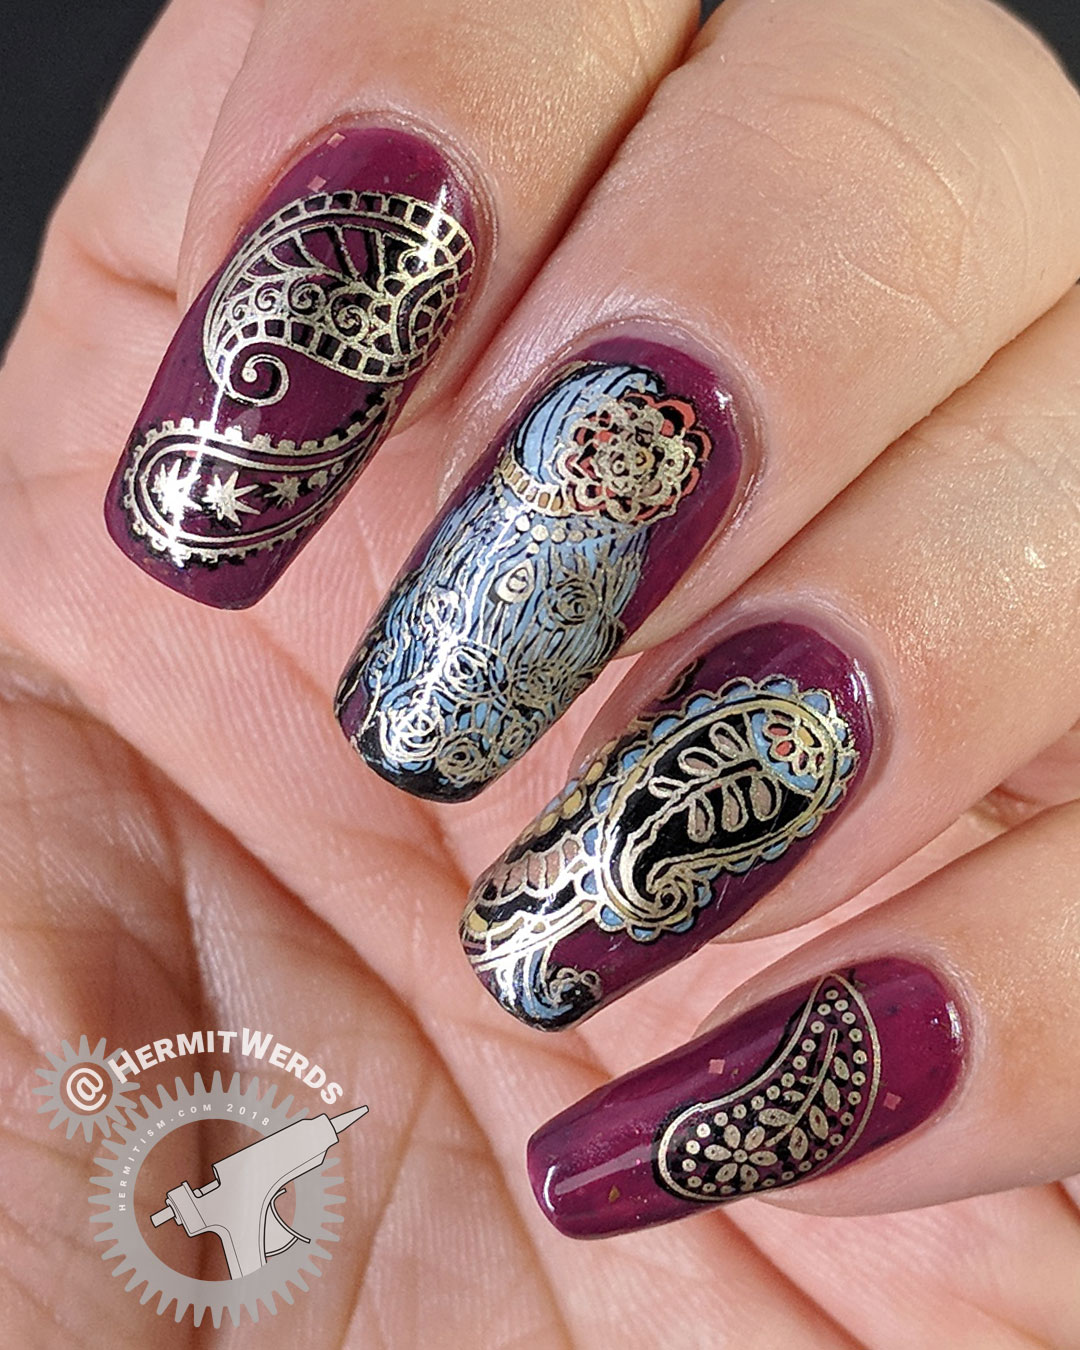 The Fanciest Paisley - Hermit Werds - ornate golden and cranberry paisley nail art